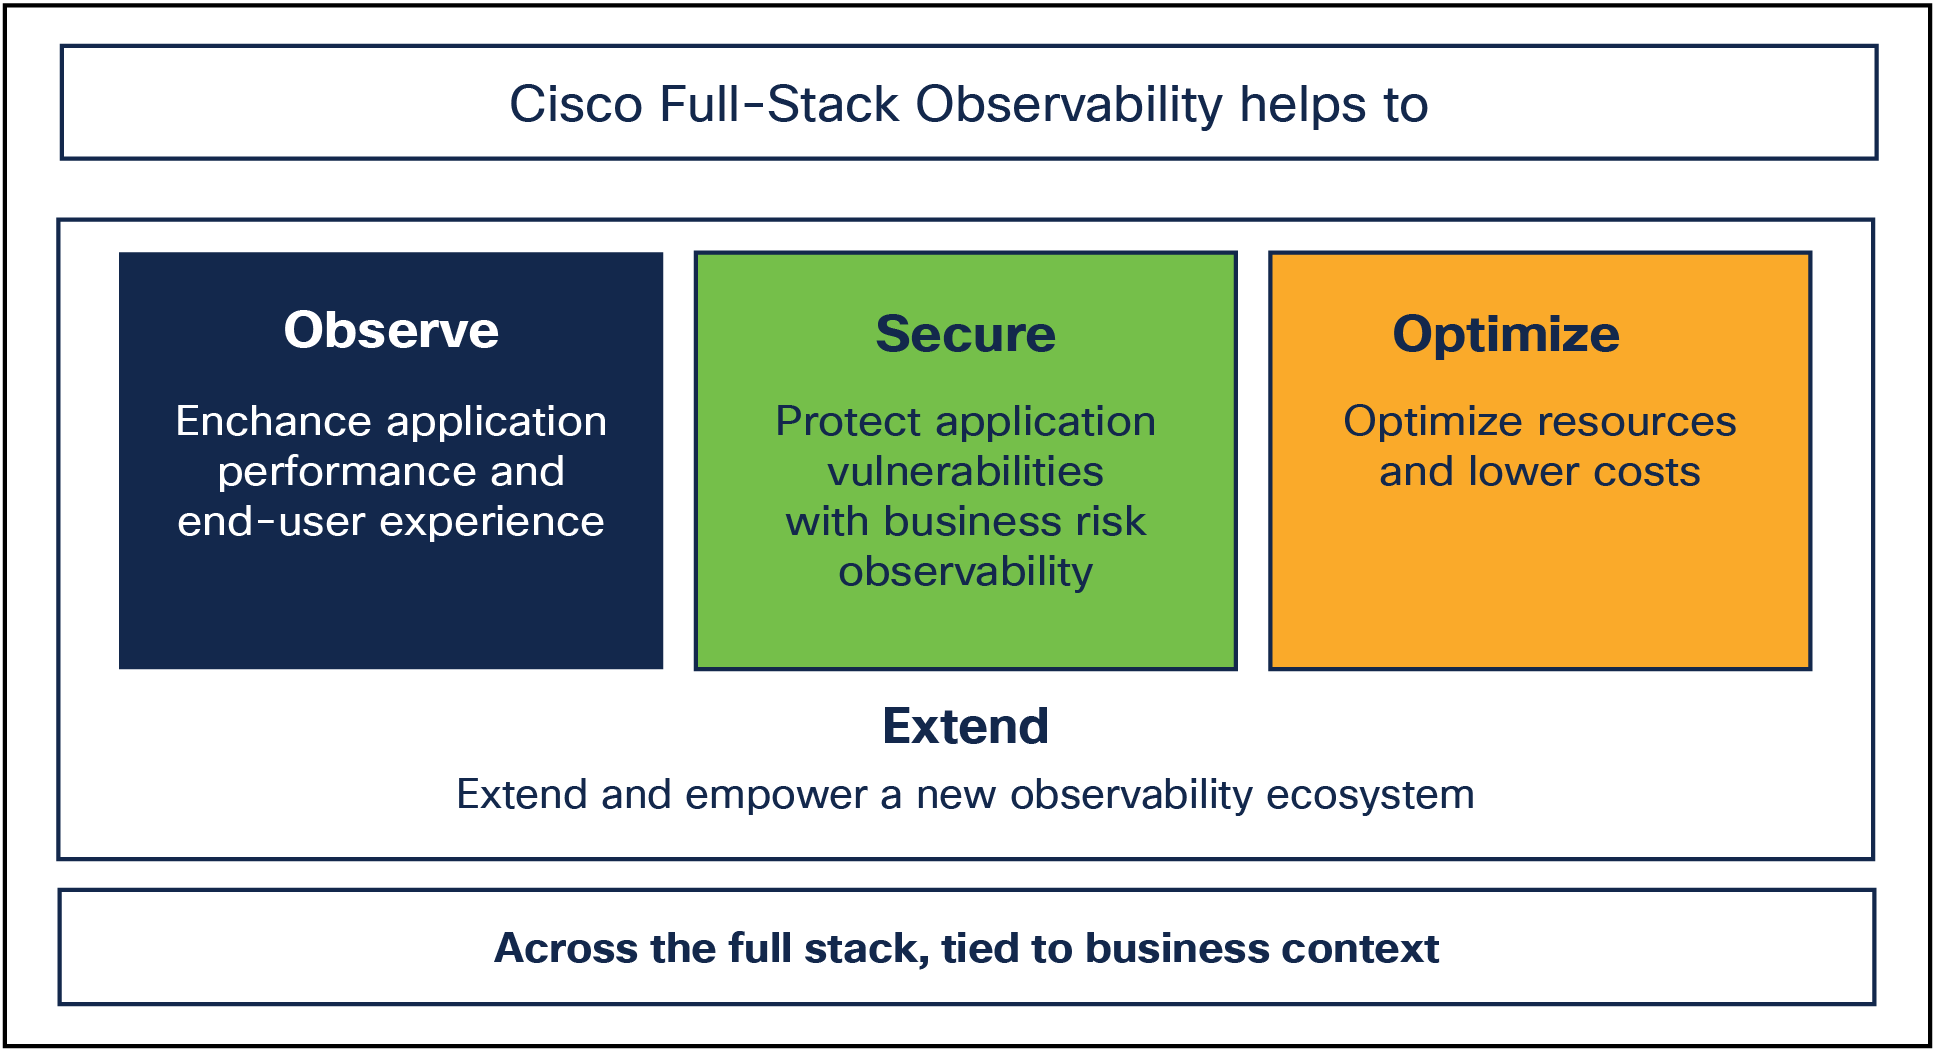 Full-stack observability from Cisco